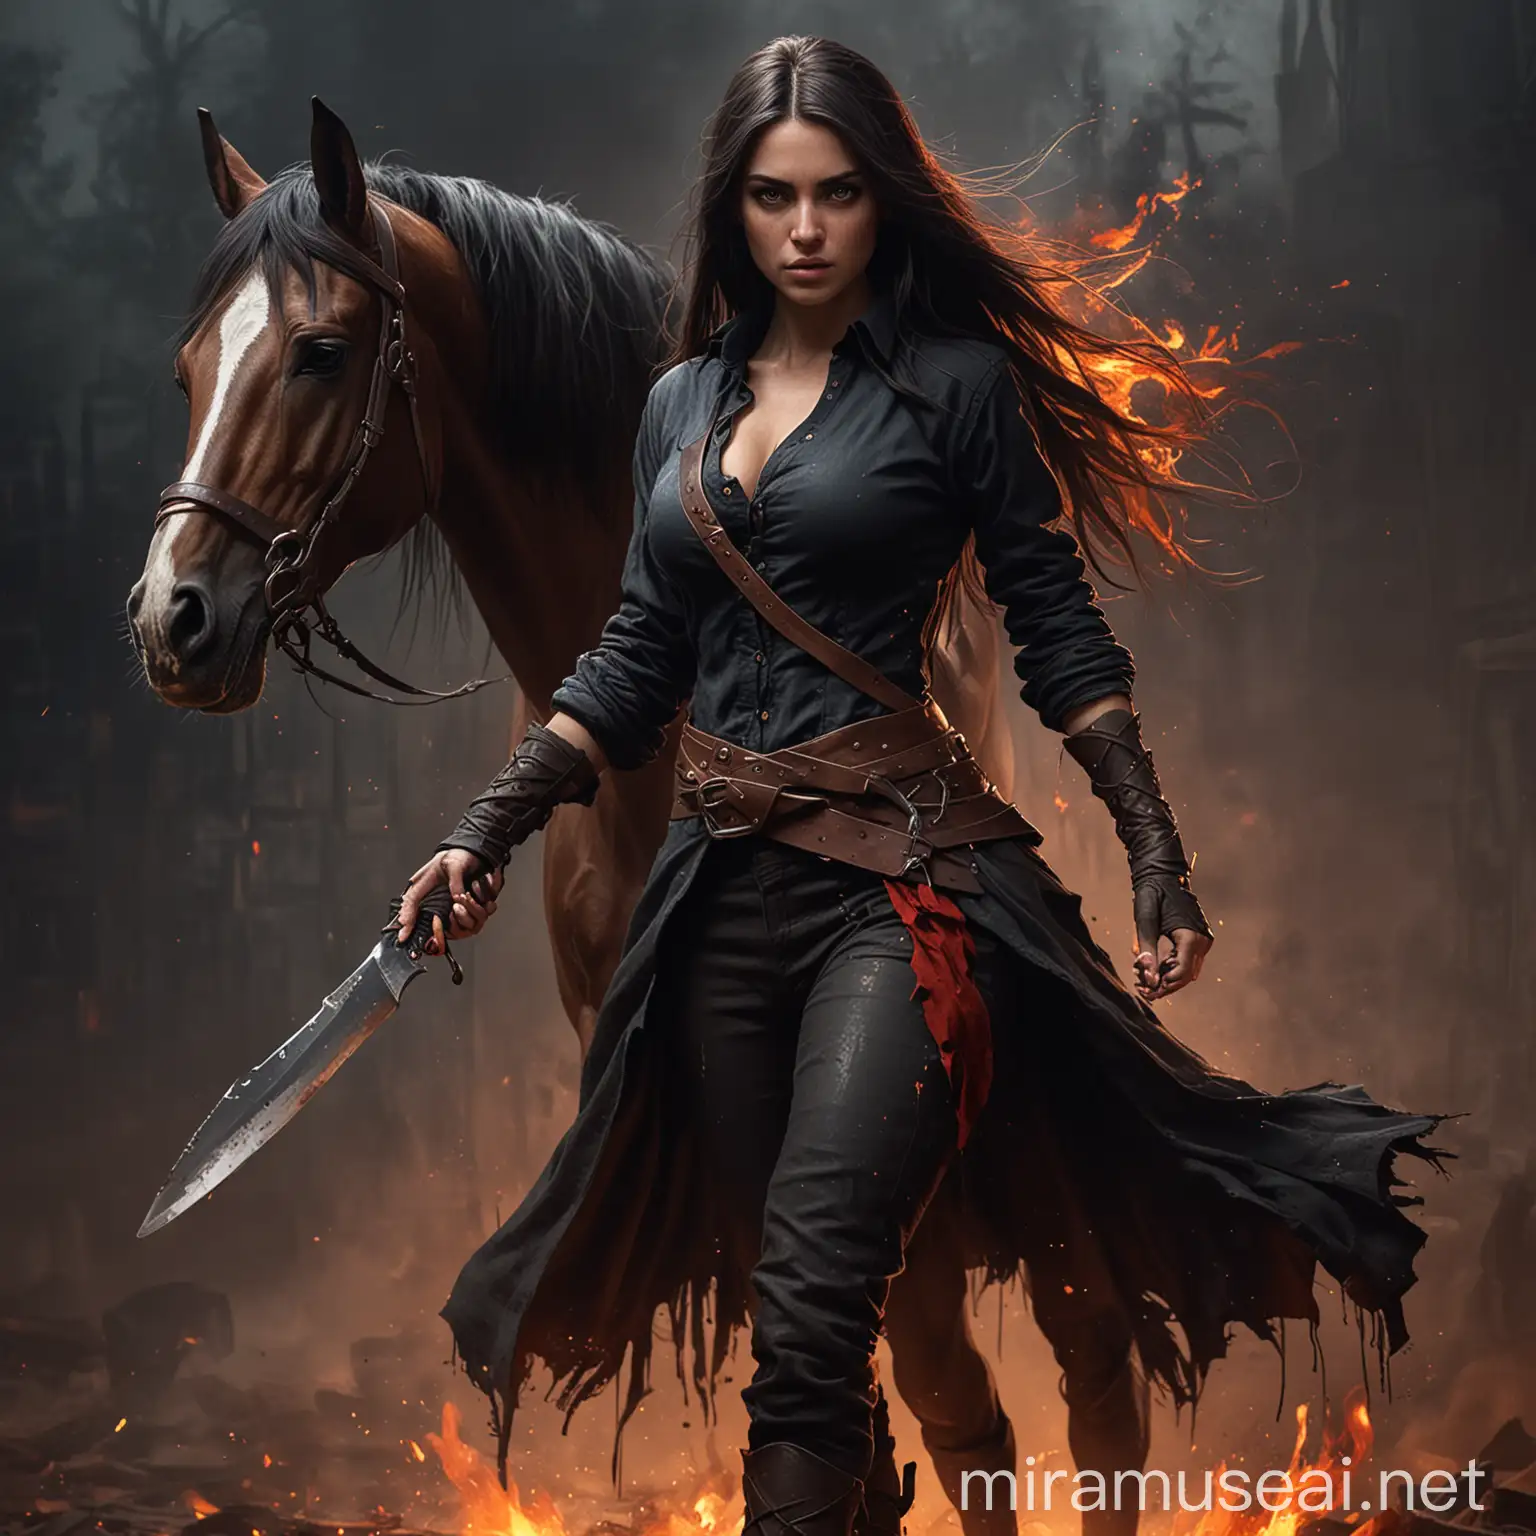 Create a full length character of a fiery knife throwing girl, with long dark hair, dark eyes, stable hand clothes with a horse